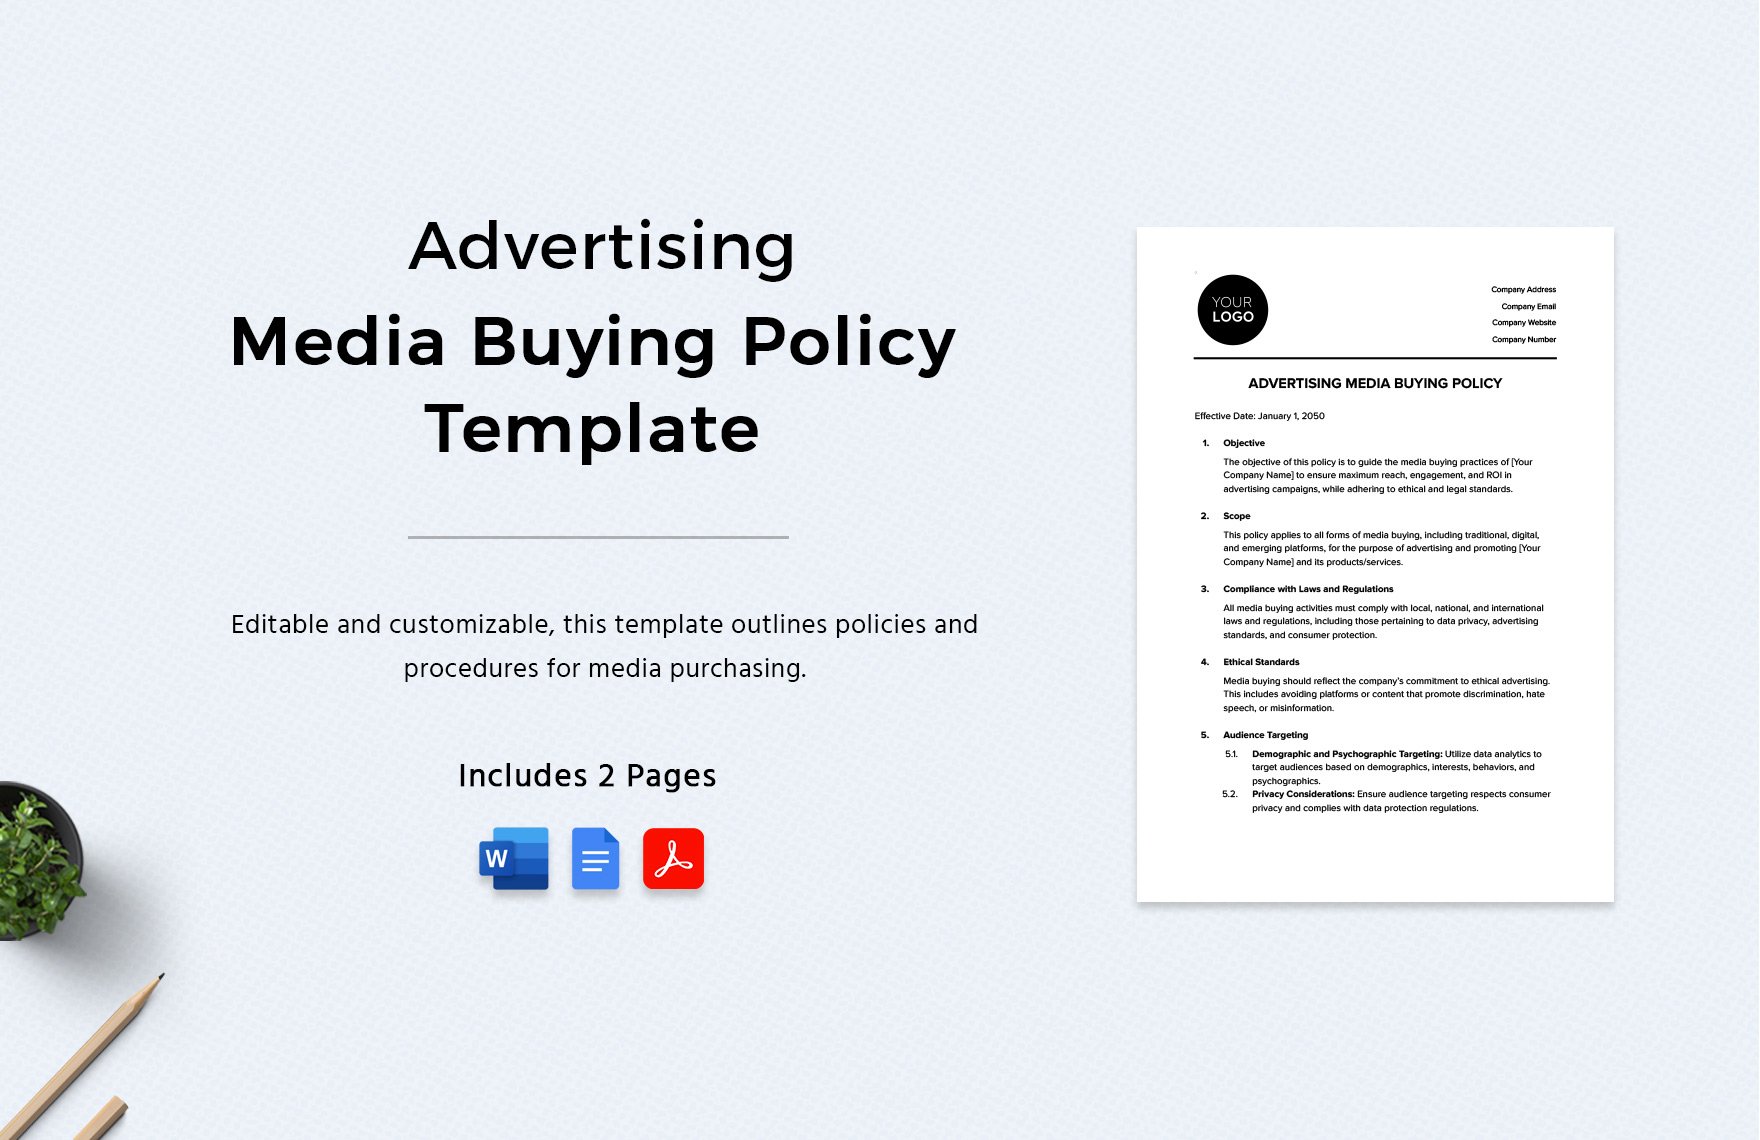 Advertising Media Buying Policy Template